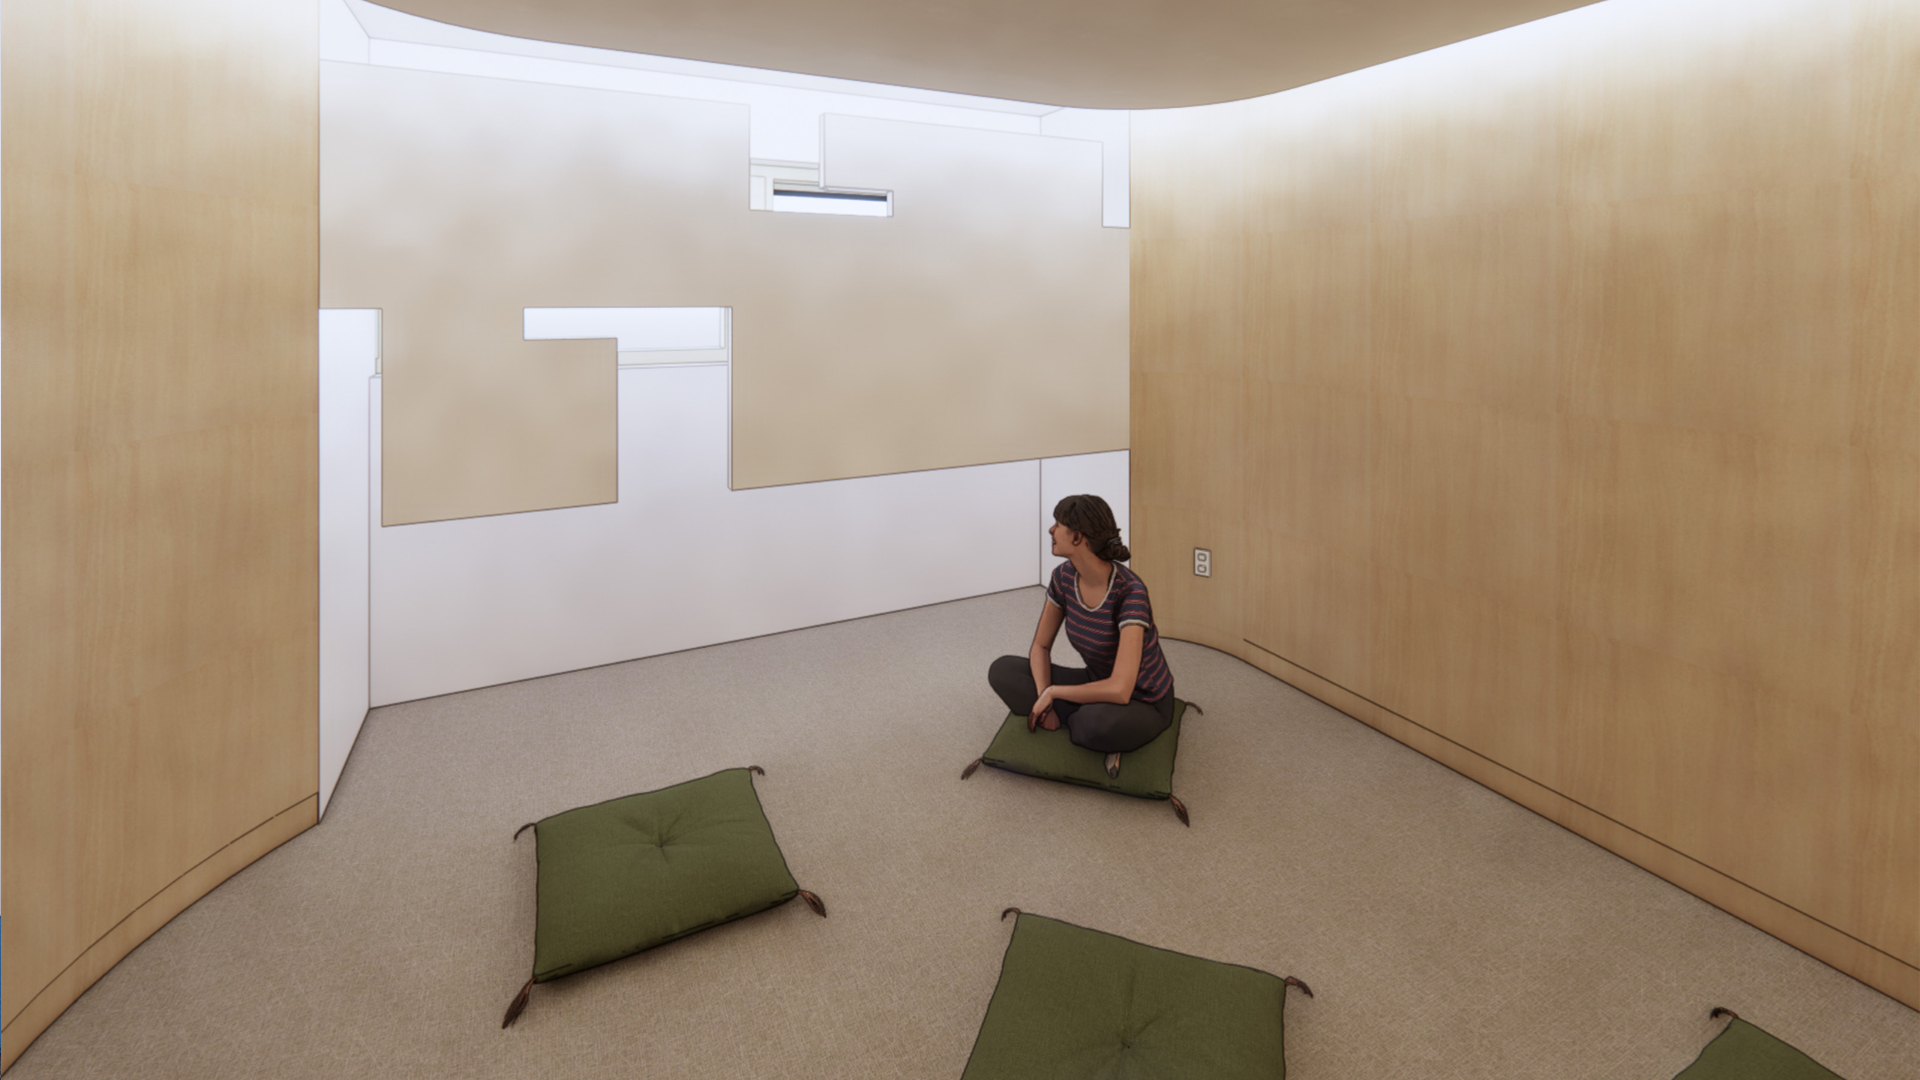 Rendering of CIE Interfaith Meditation Space